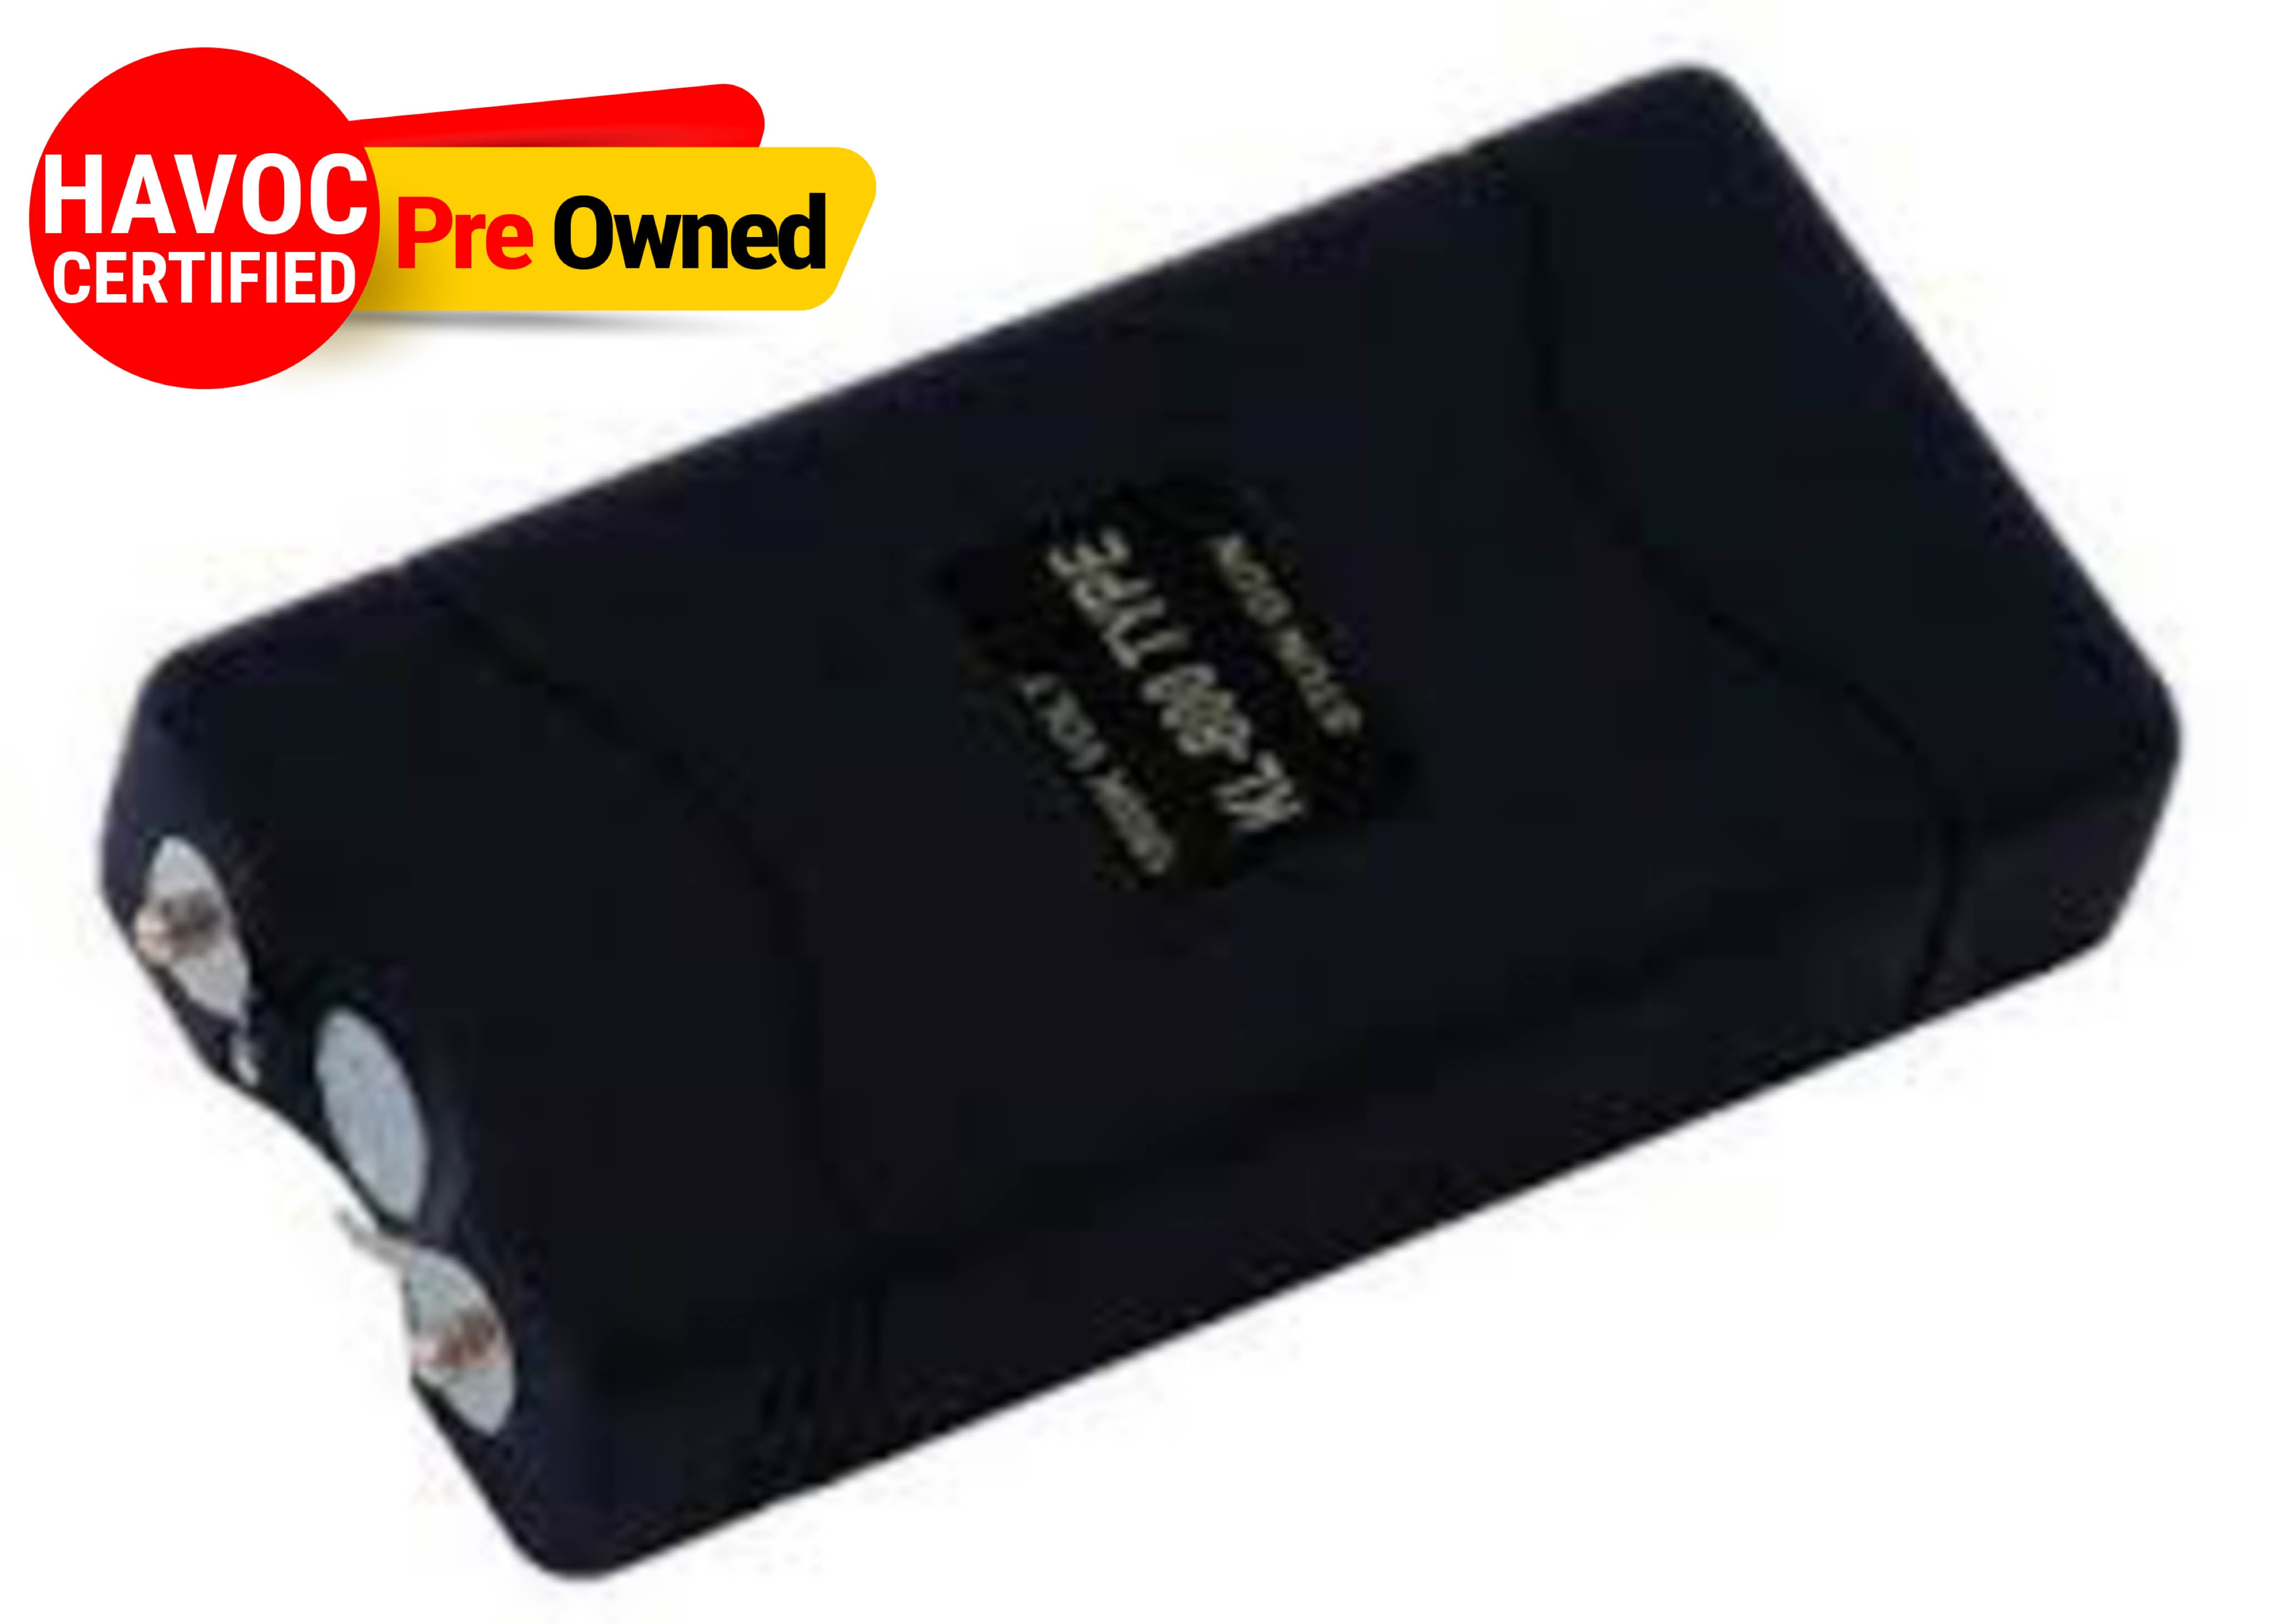 Led Rechargeable Battery Self Defense Stun Gun For Daily Use at Rs